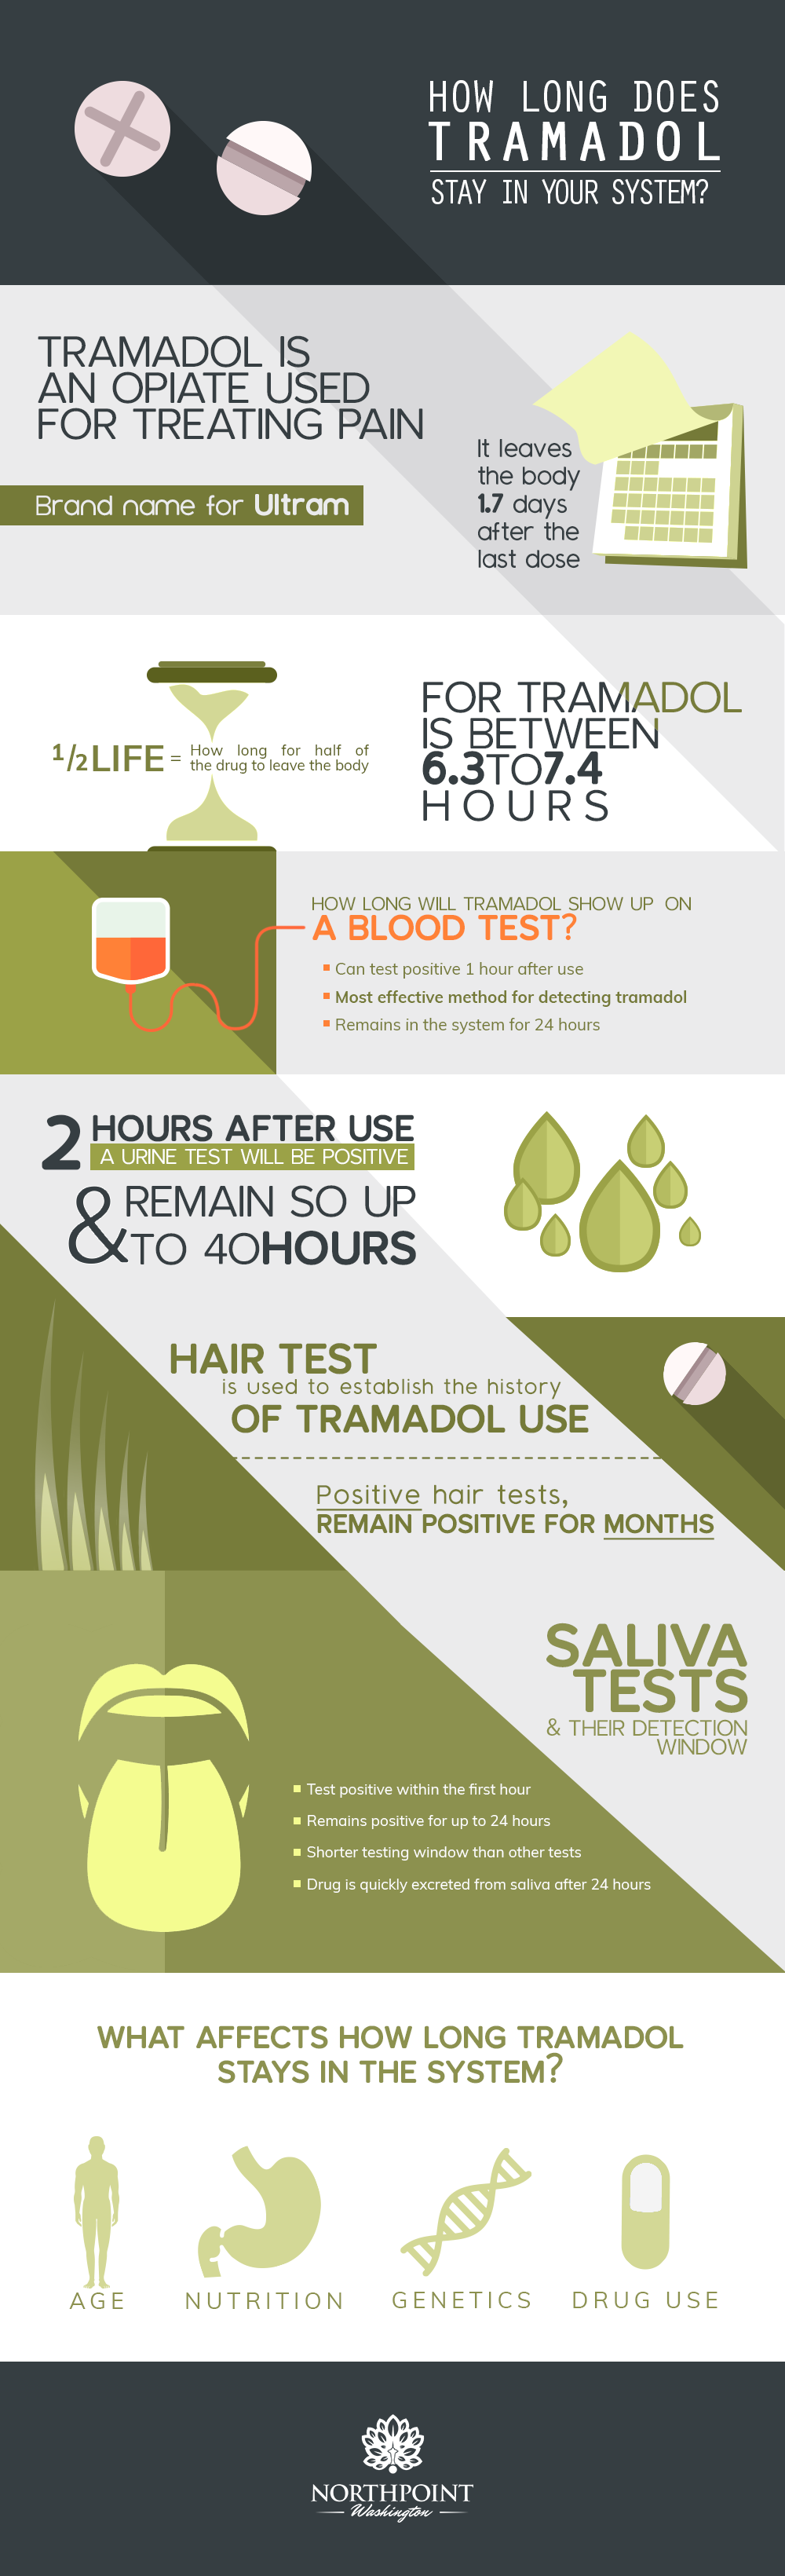 How Long Does Tramadol Remain in the System Infographic